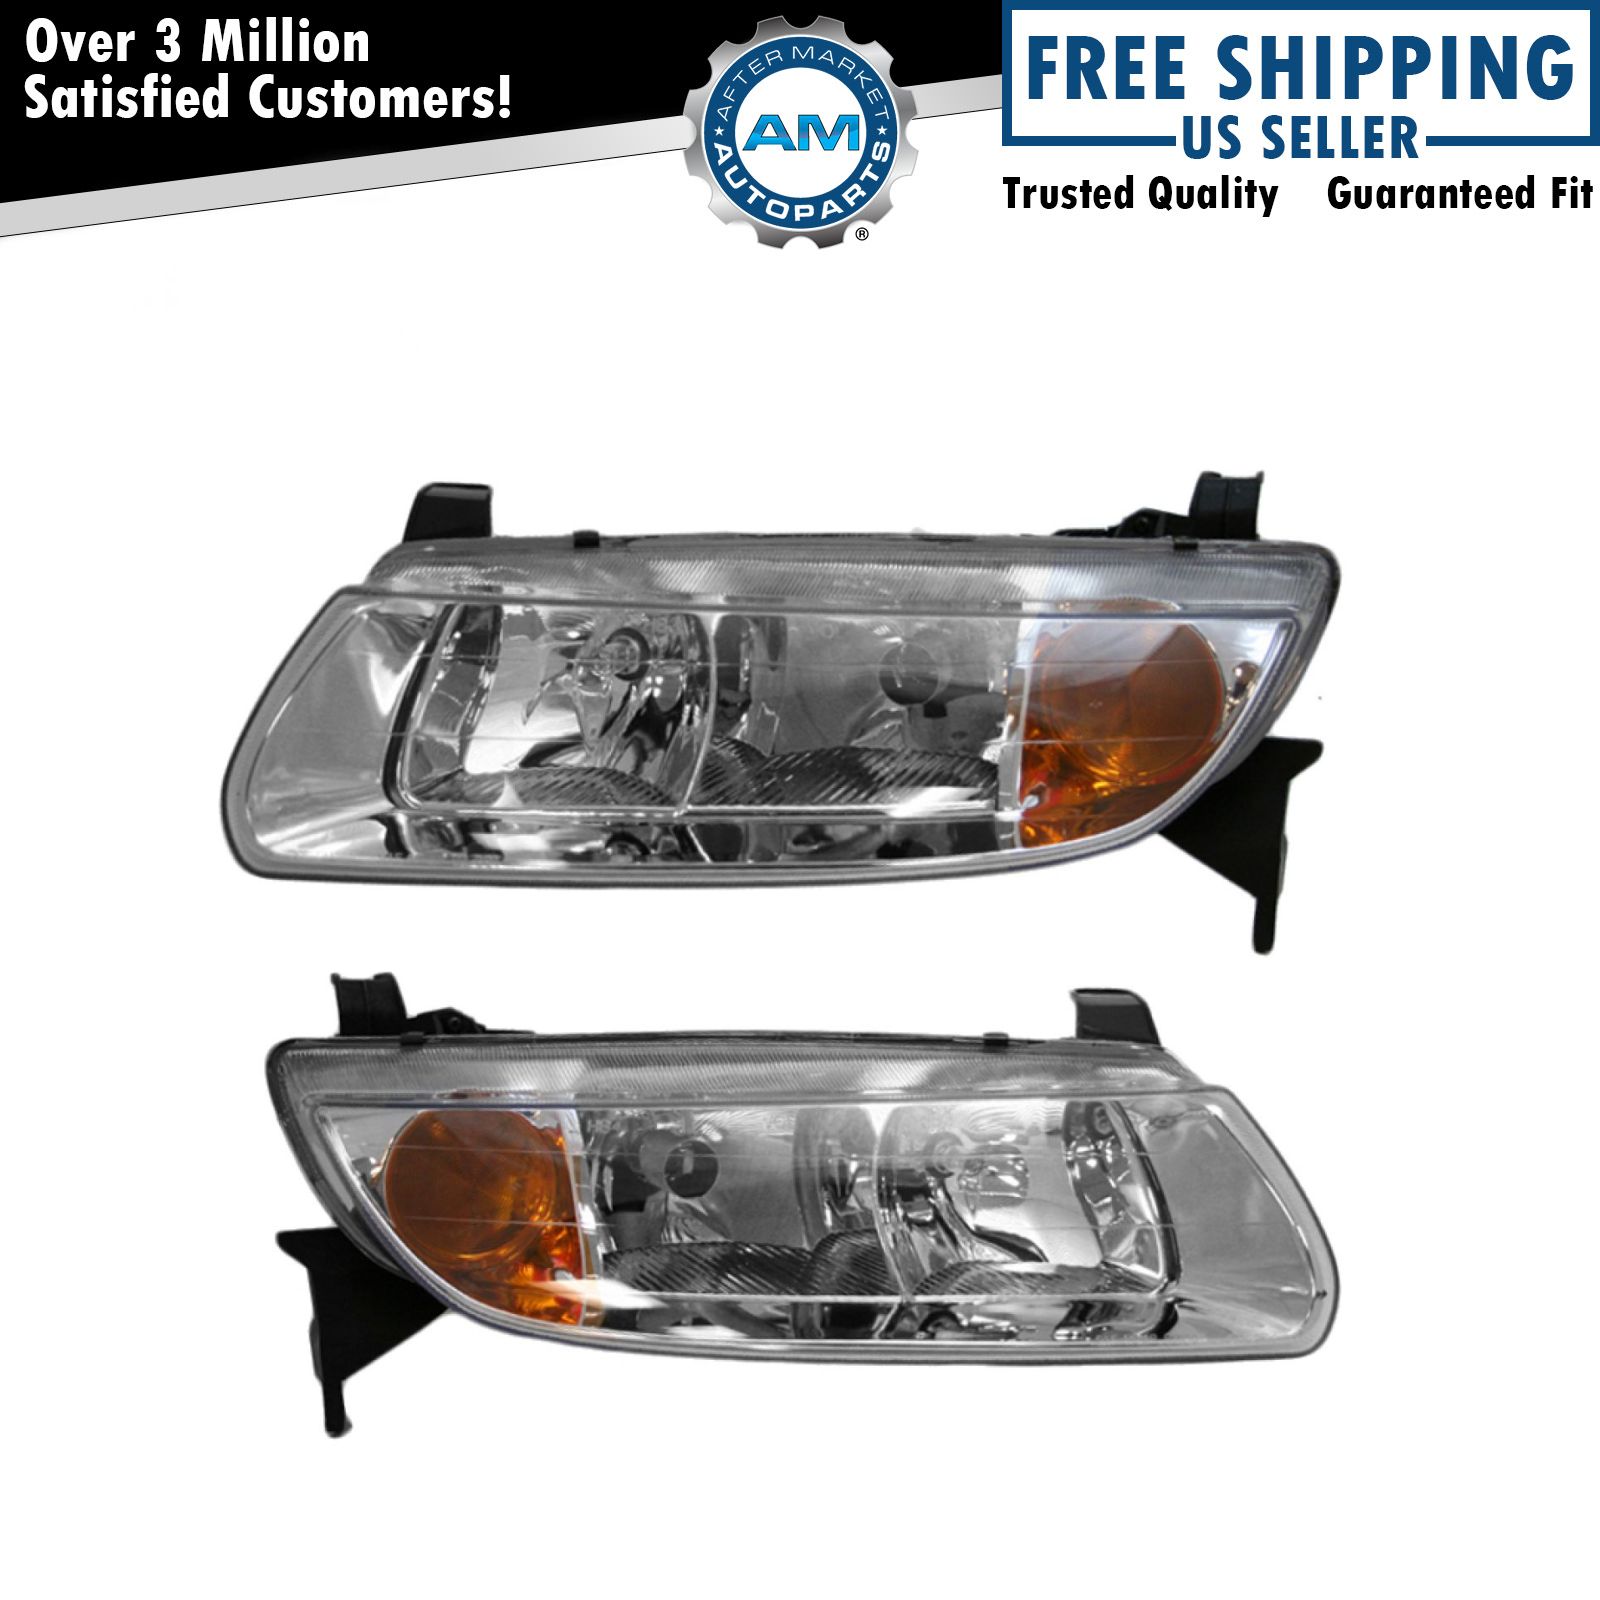 Headlights Headlamps Left & Right Pair Set NEW for 00-02 Saturn L Series